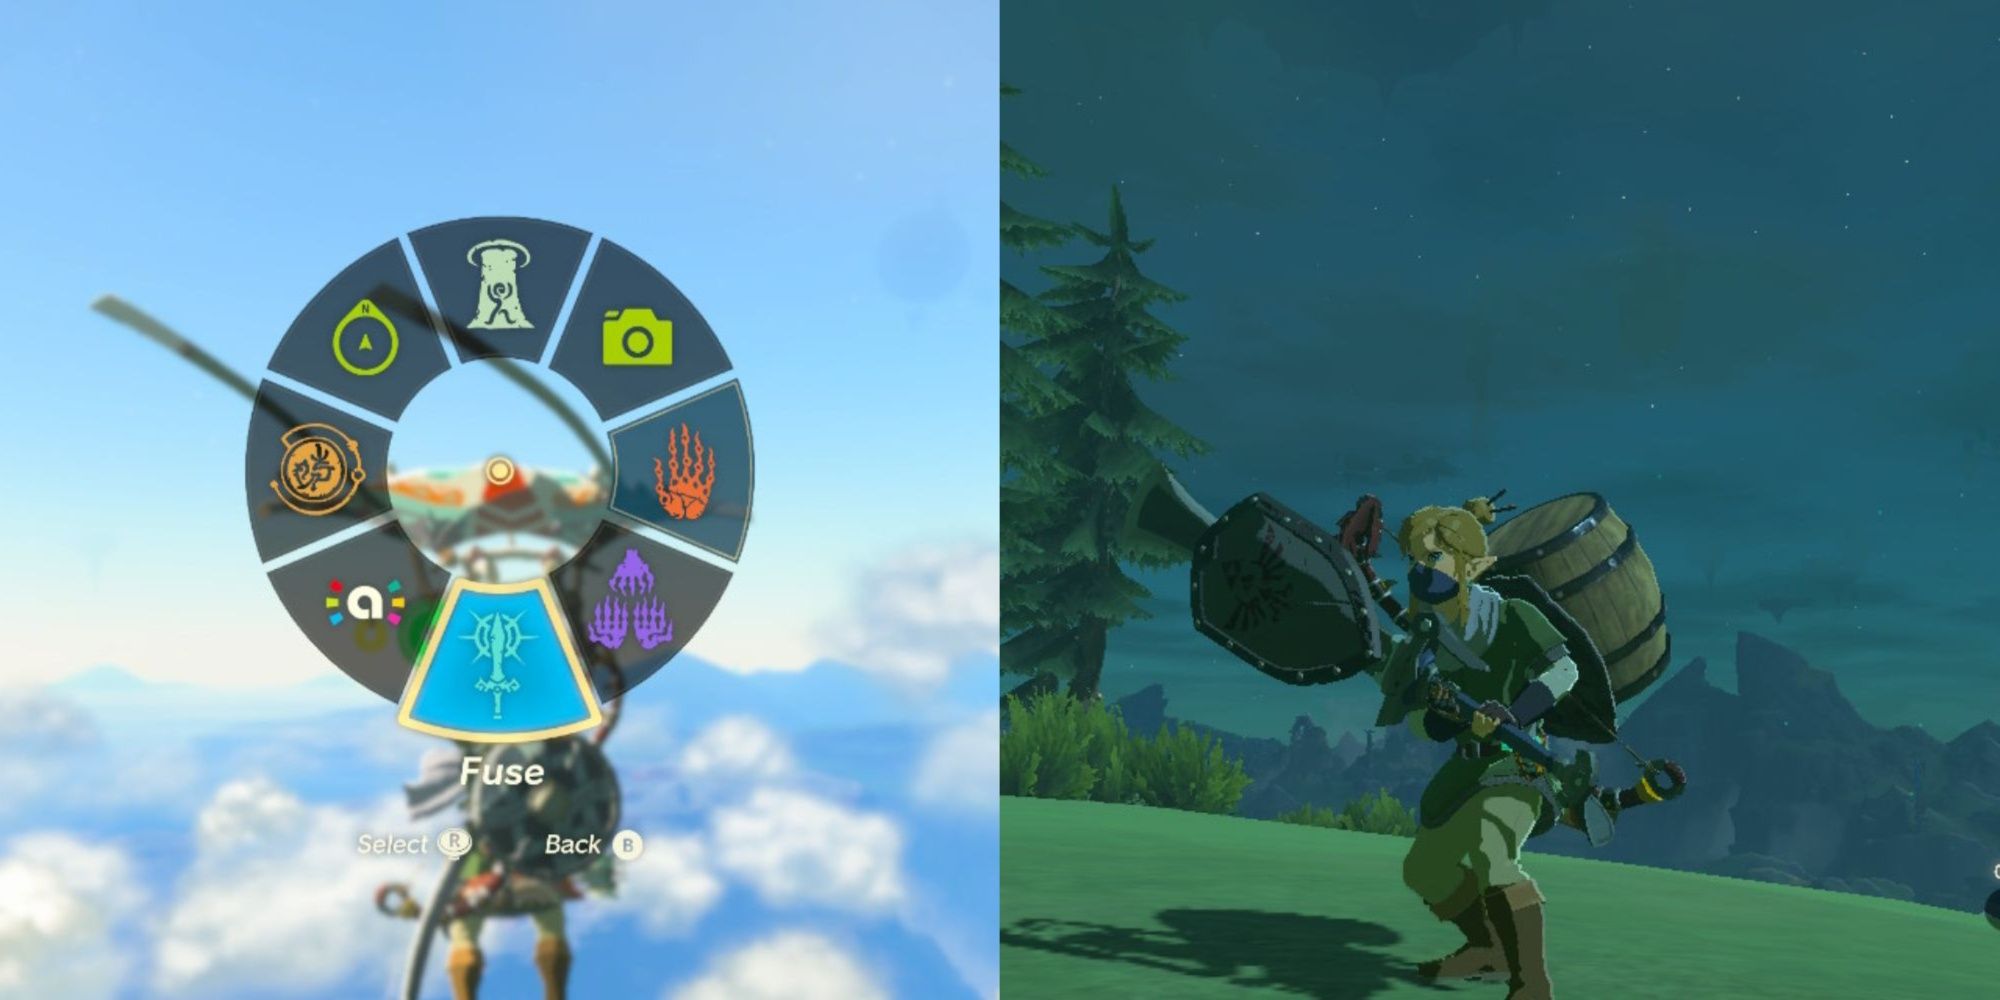 Zelda Tears of the Kingdom Split Image of Ability Wheel and Link Using Fuse Ability